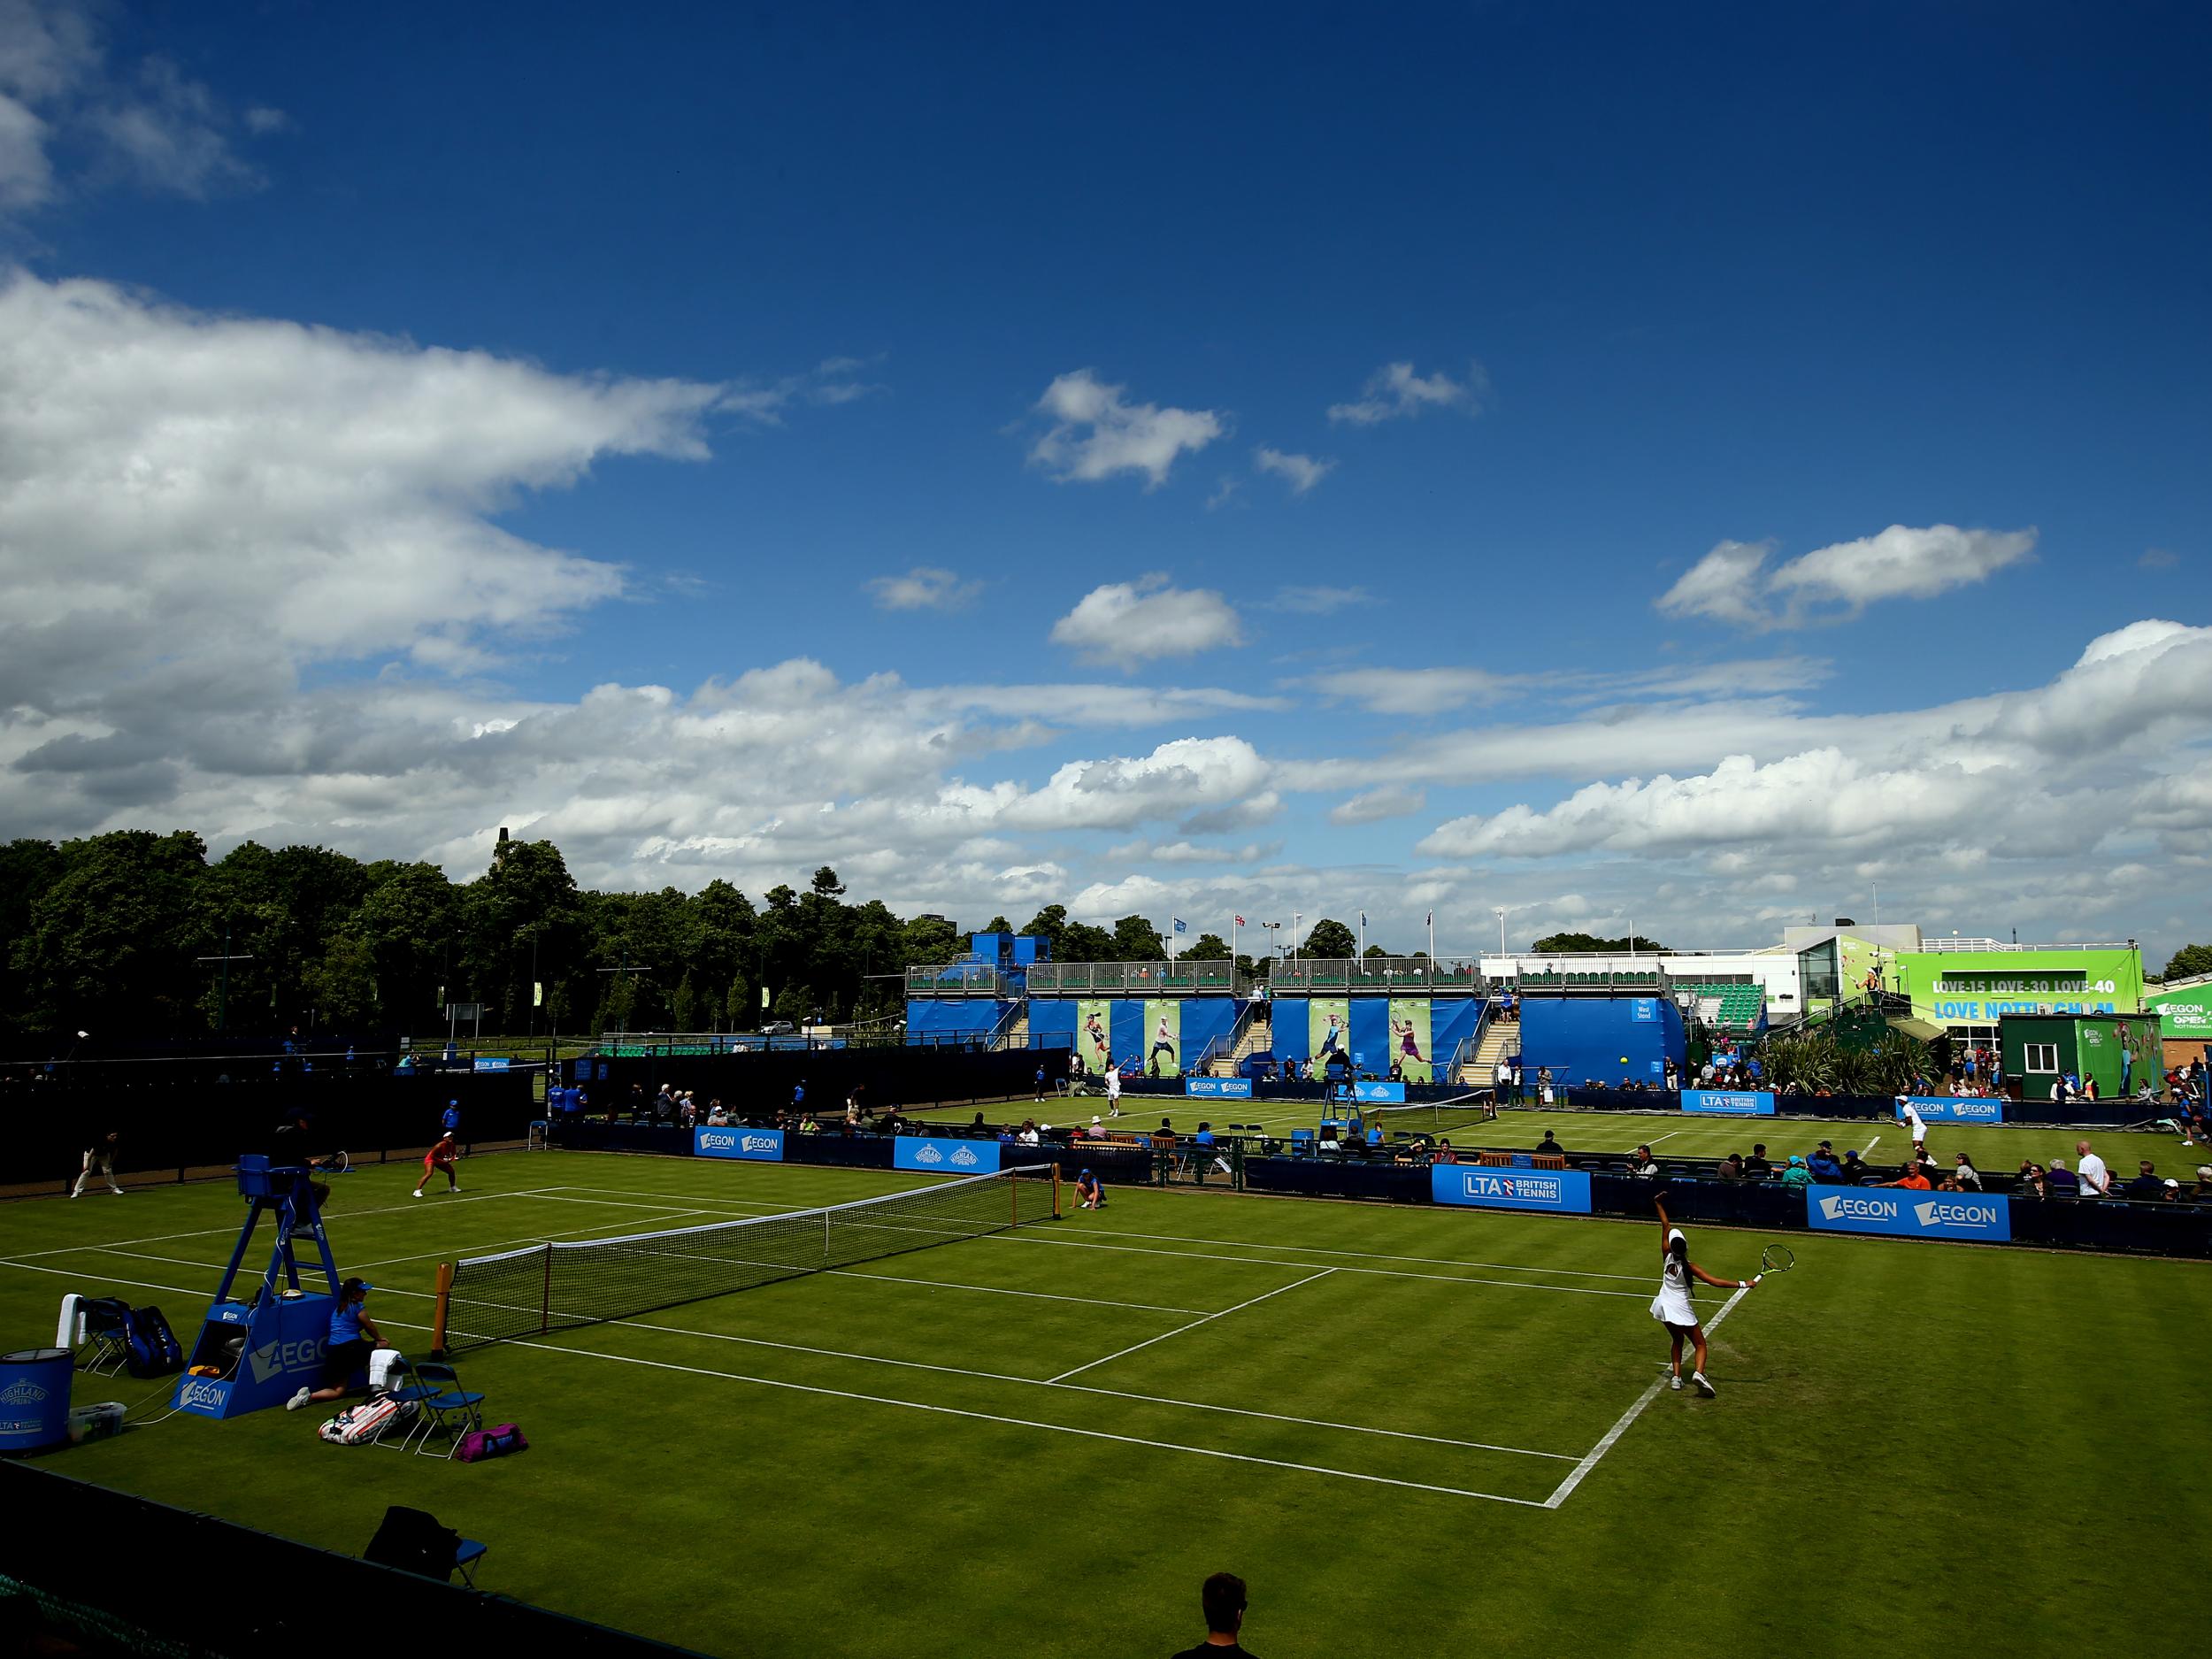 Tara Moore, Laura Robson and Heather Watson received wildcards into Nottingham